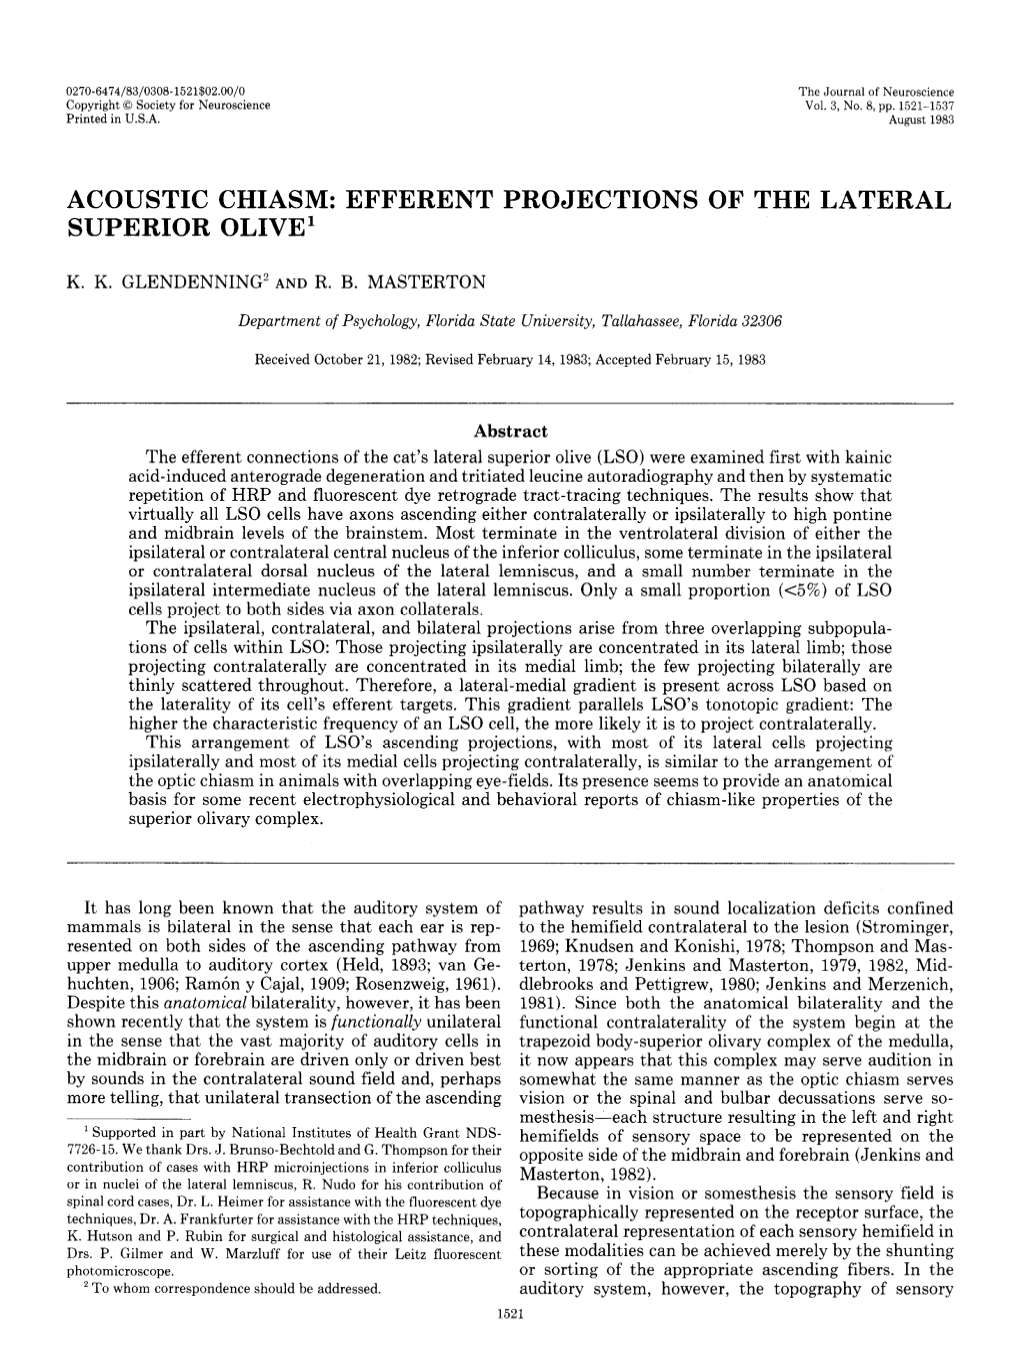 Acoustic Chiasm: Efferent Projections of the Lateral Superior Olive1